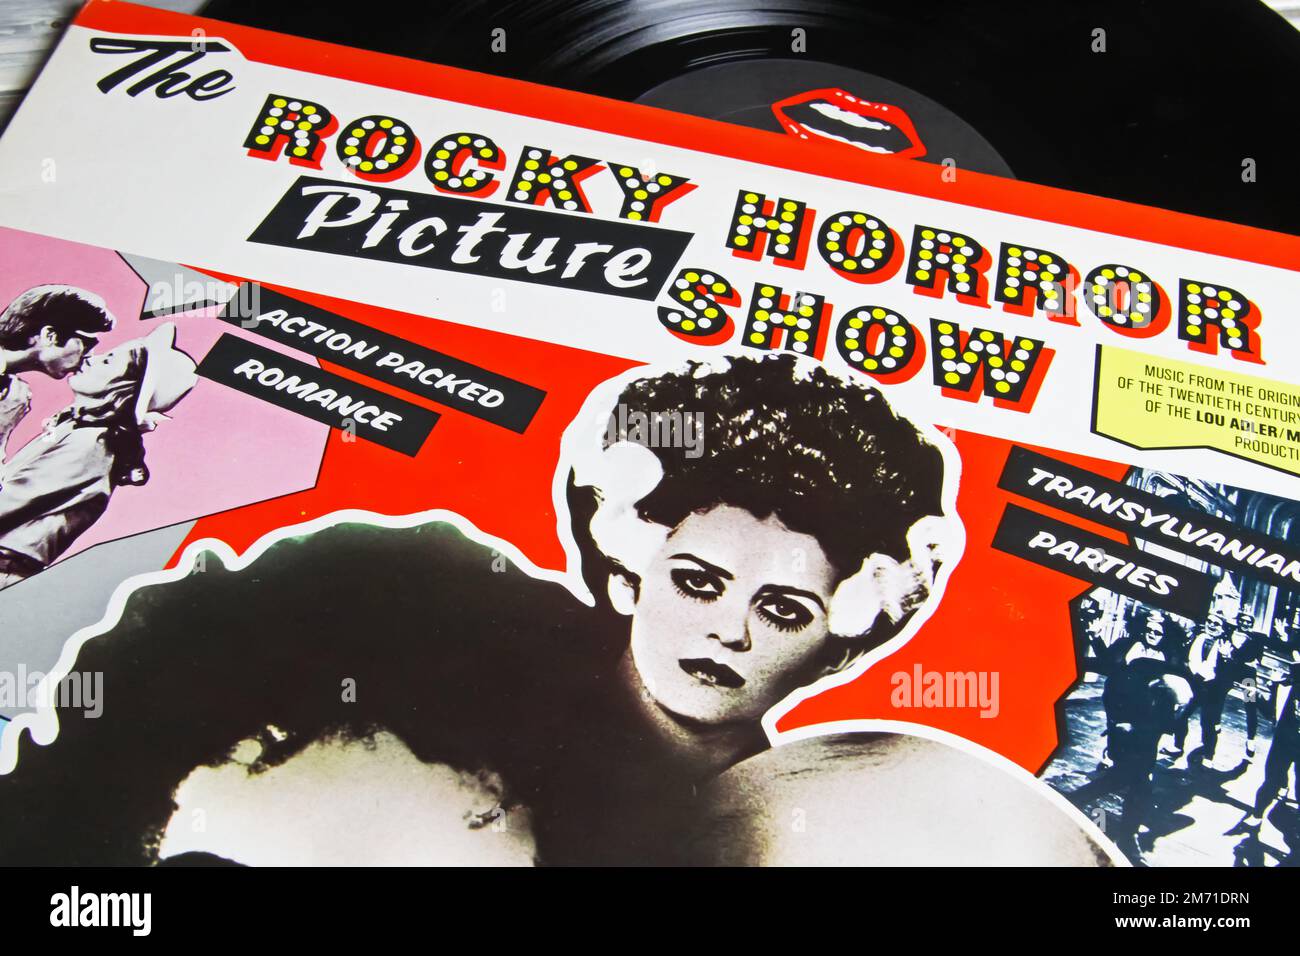 Viersen, Germany - May 9. 2022: Closeup of vinyl record cover of movie soundtrack rocky horror picture show Stock Photo